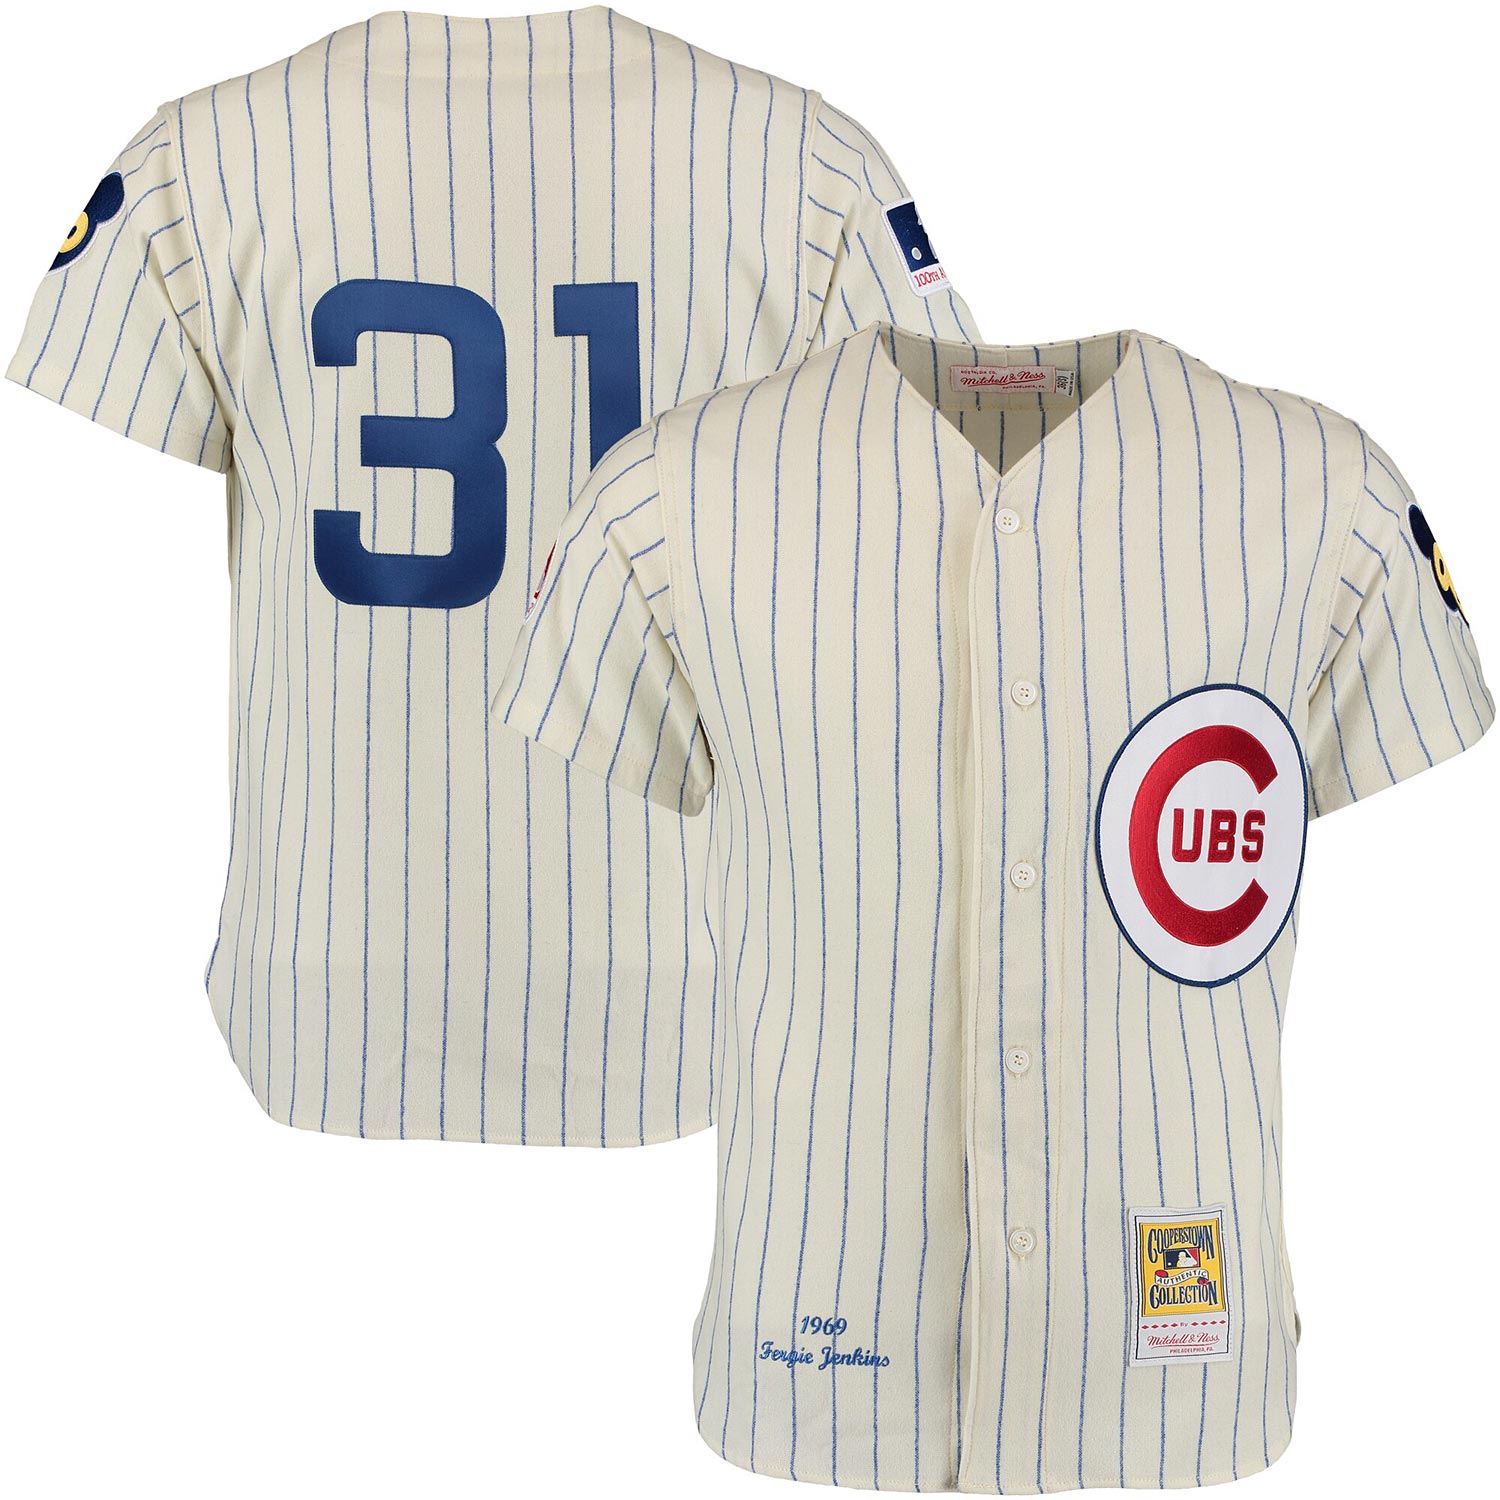 Chicago Cubs Andre Dawson 1987 Mitchell & Ness Authentic Home Jersey 60 = 4X